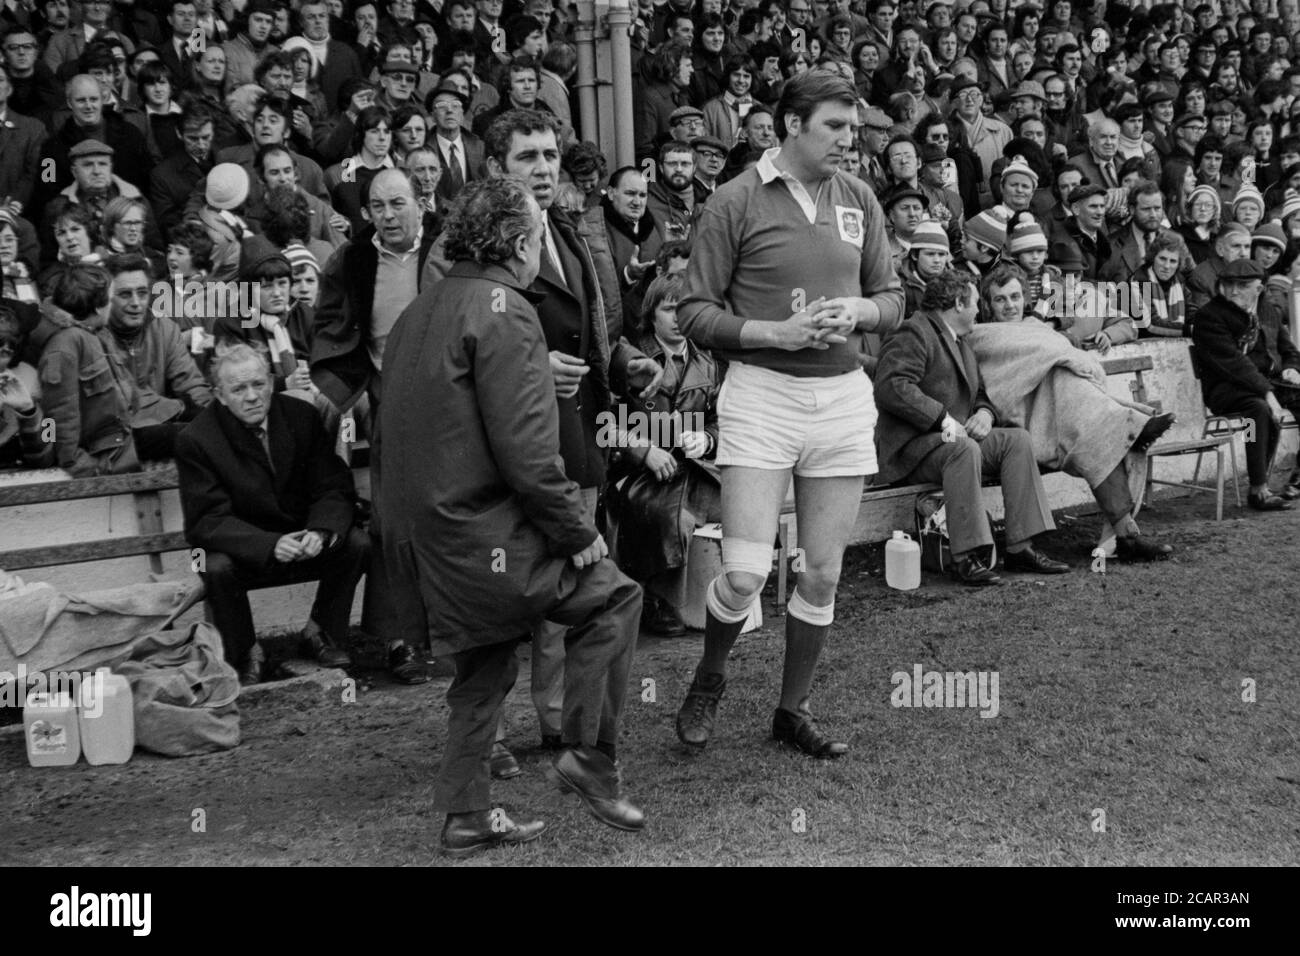 Llanelli RFC replacement flanker Roger Hyndman waiting to head into the fray of the WRU Cup Semi-Final clash with Bridgend RFC held at St Helens Rugby and Cricket Ground, Swansea, Wales on 23 March 1975. Stock Photo